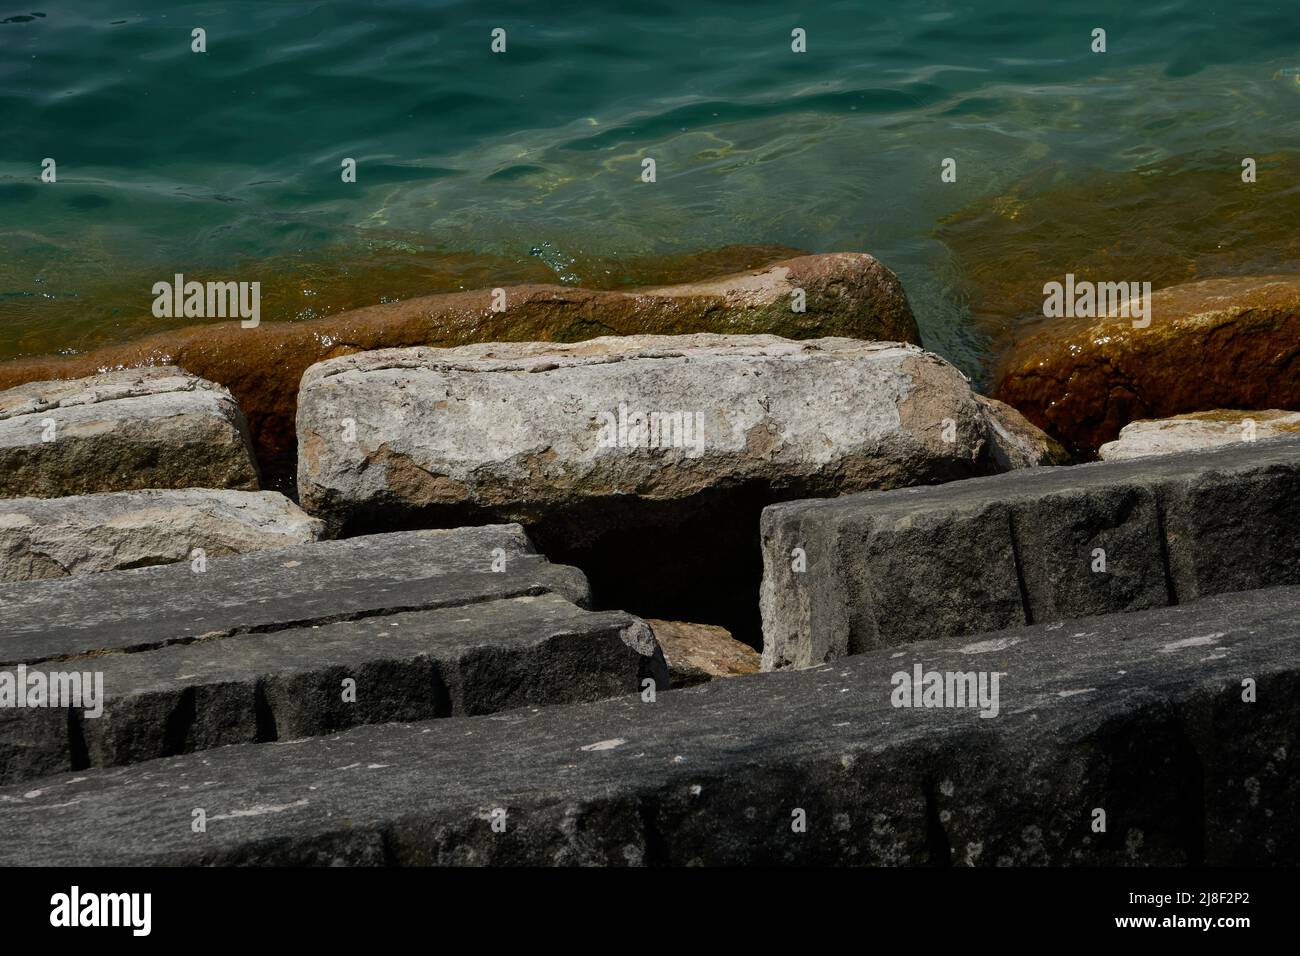 partially submerged rocks with algae along the lakefront Stock Photo